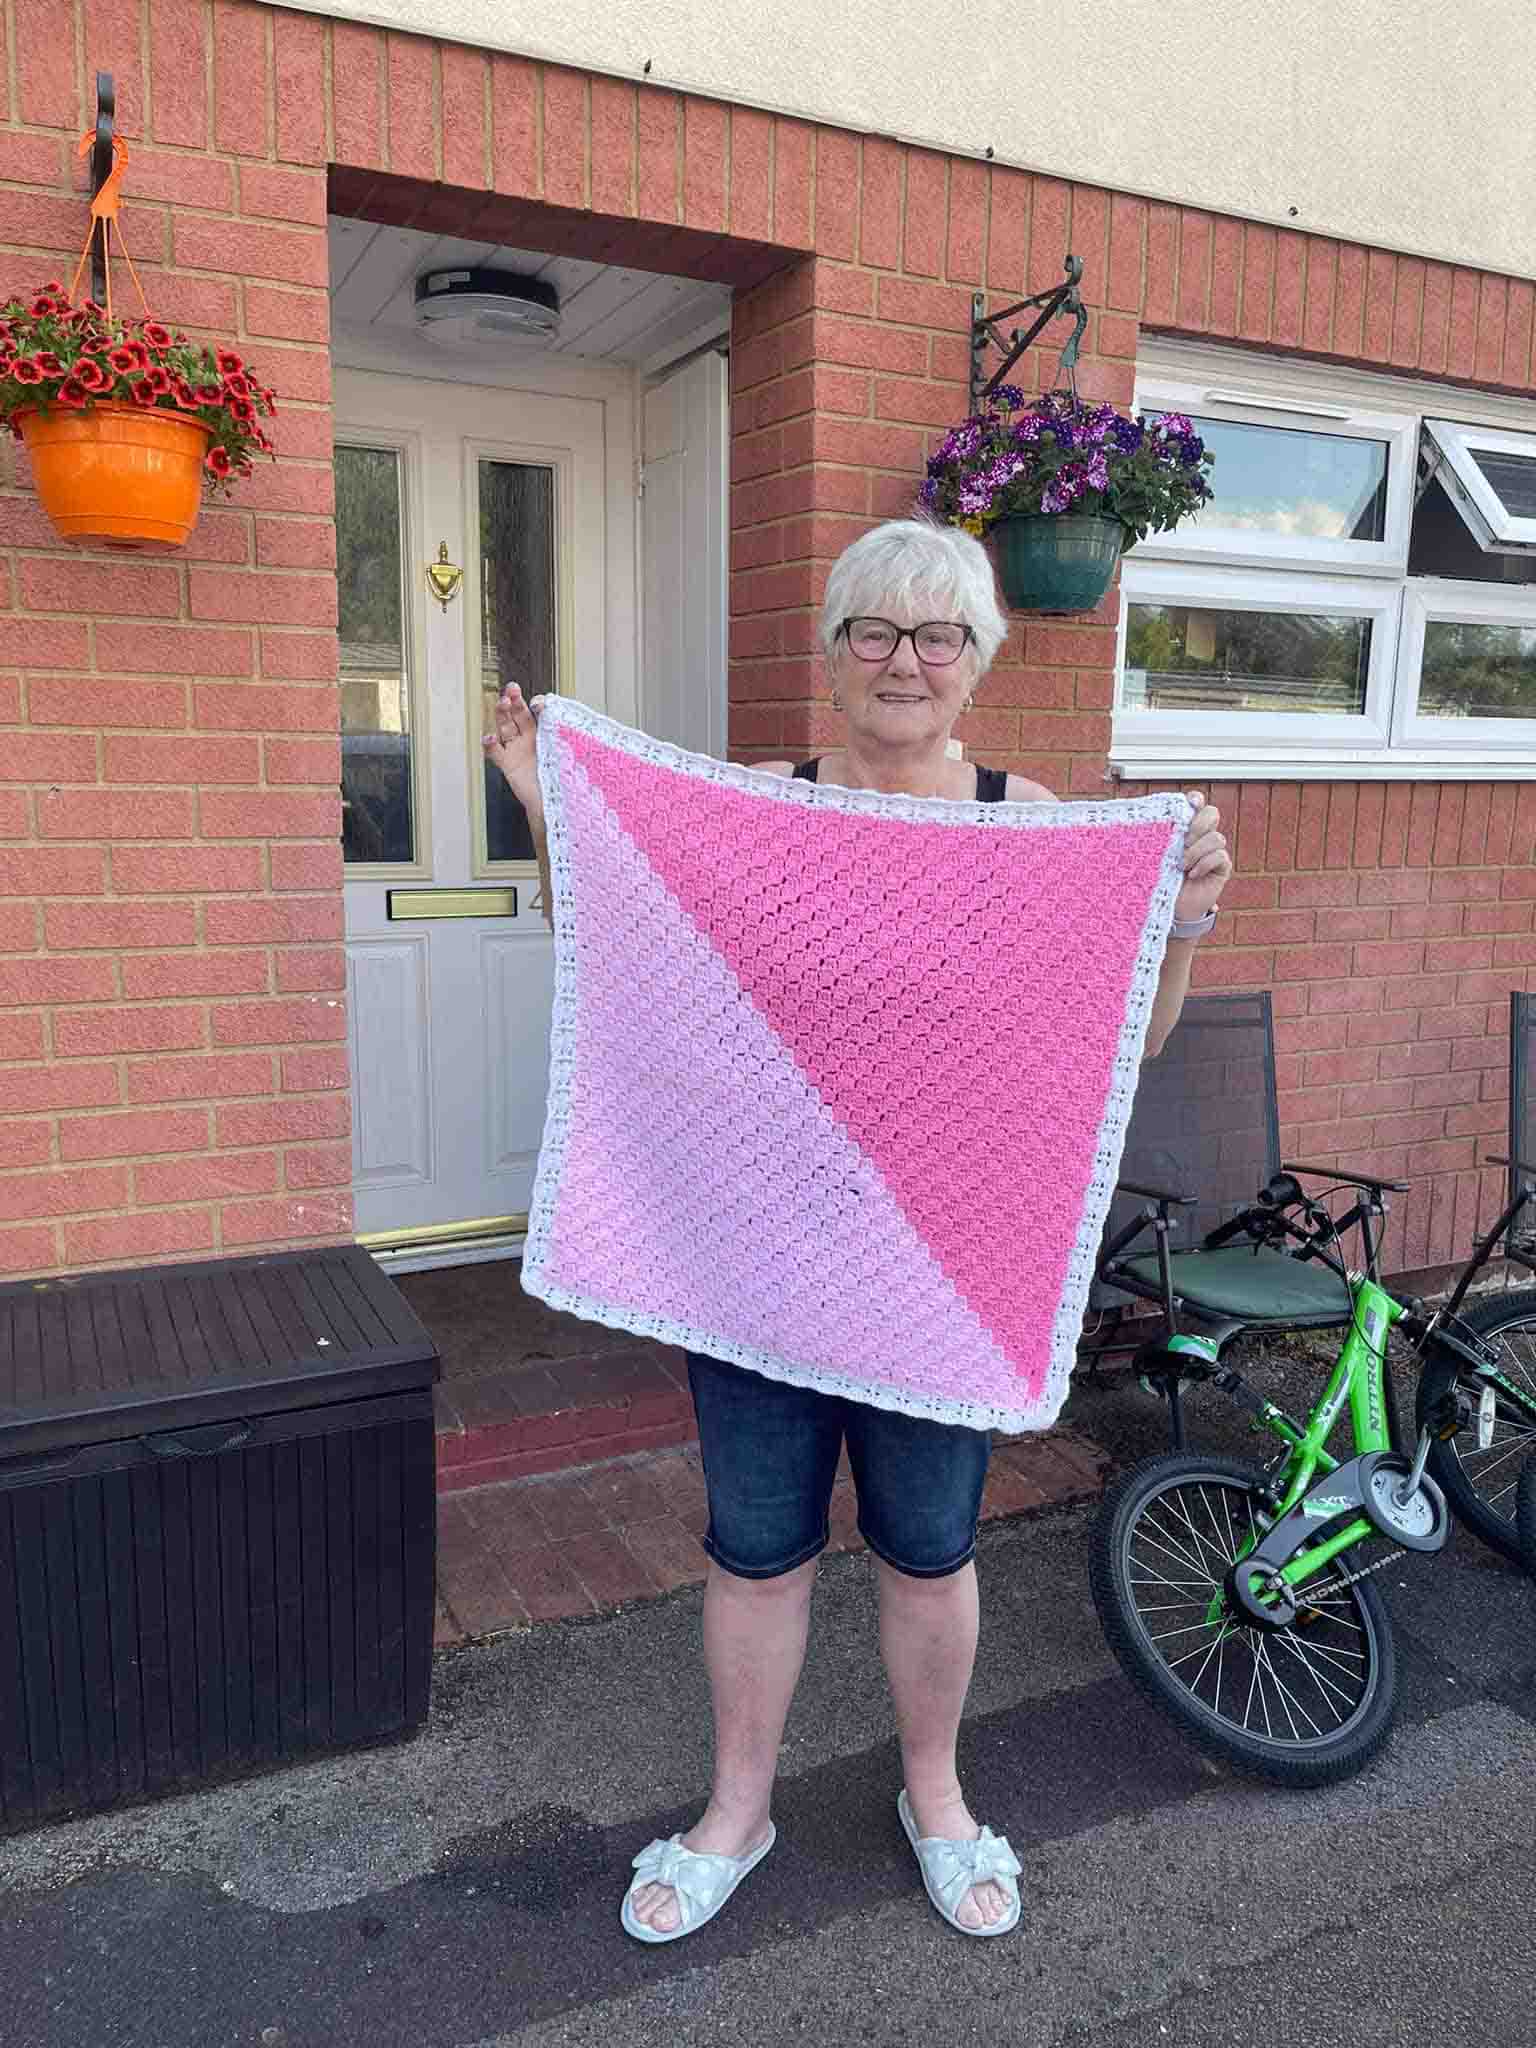 Person called Enid stands outside entrance to a residential building, holding up to camera a pink baby blanket she has knitted for clients of The Dash Charity.